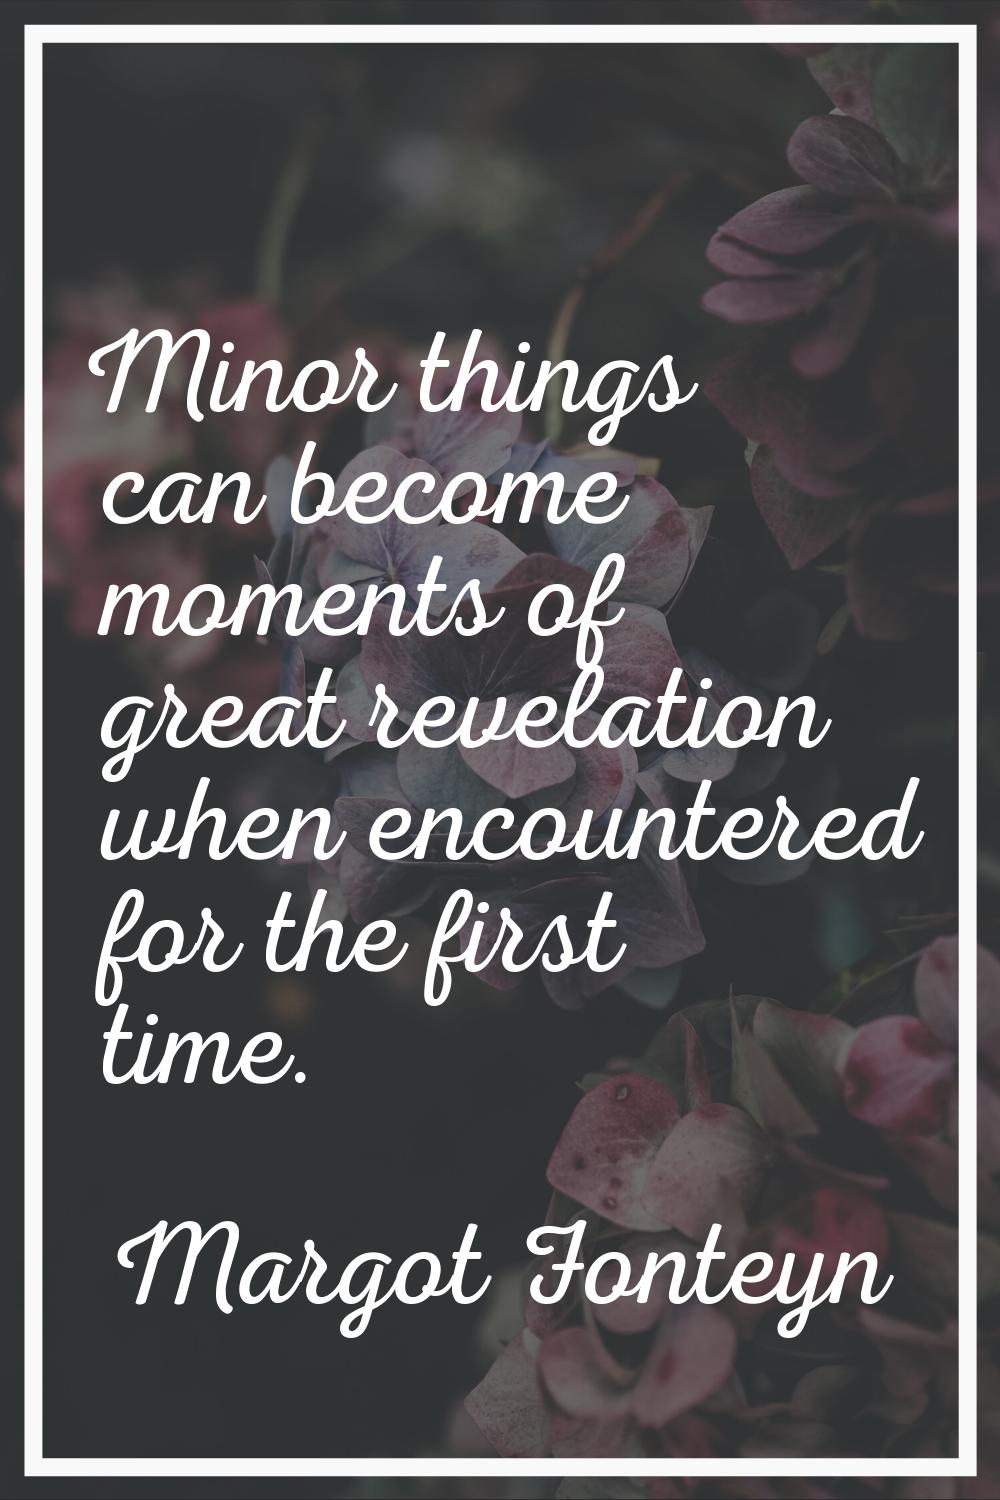 Minor things can become moments of great revelation when encountered for the first time.